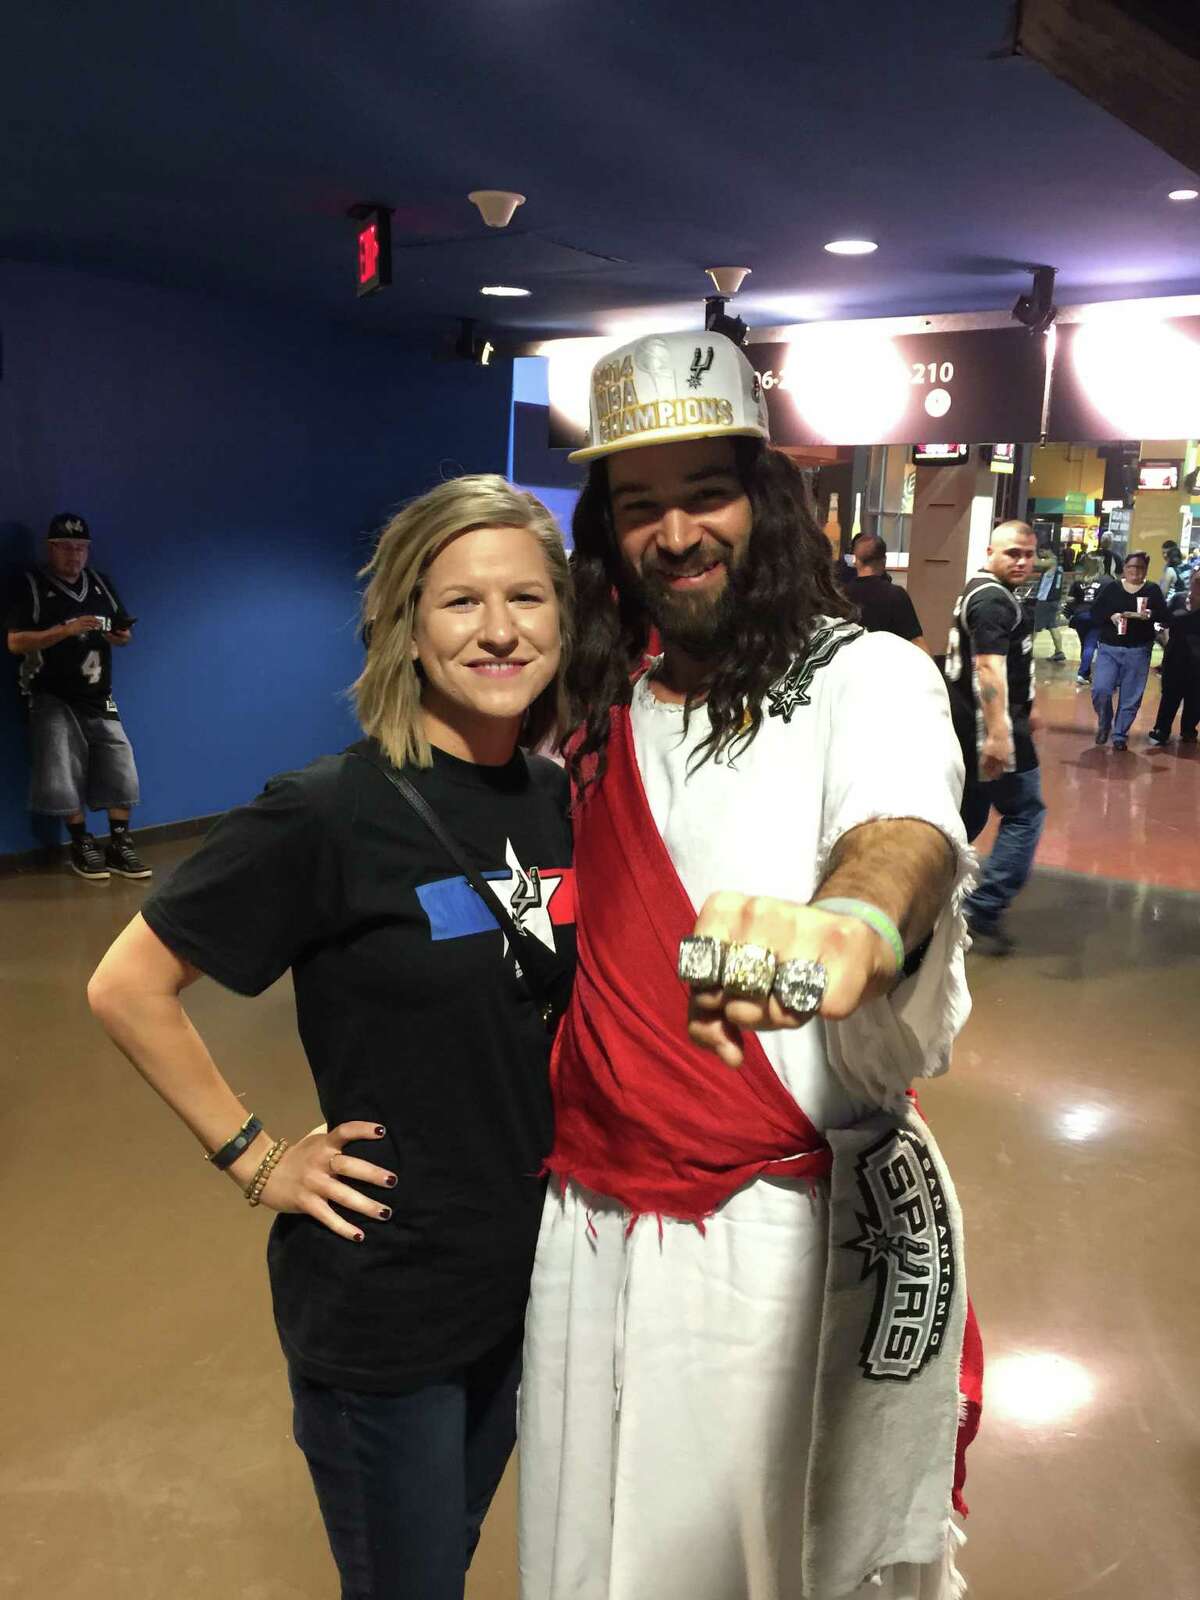 Spurs Jesus and fans enjoyed the game Friday, March 27, 2015.